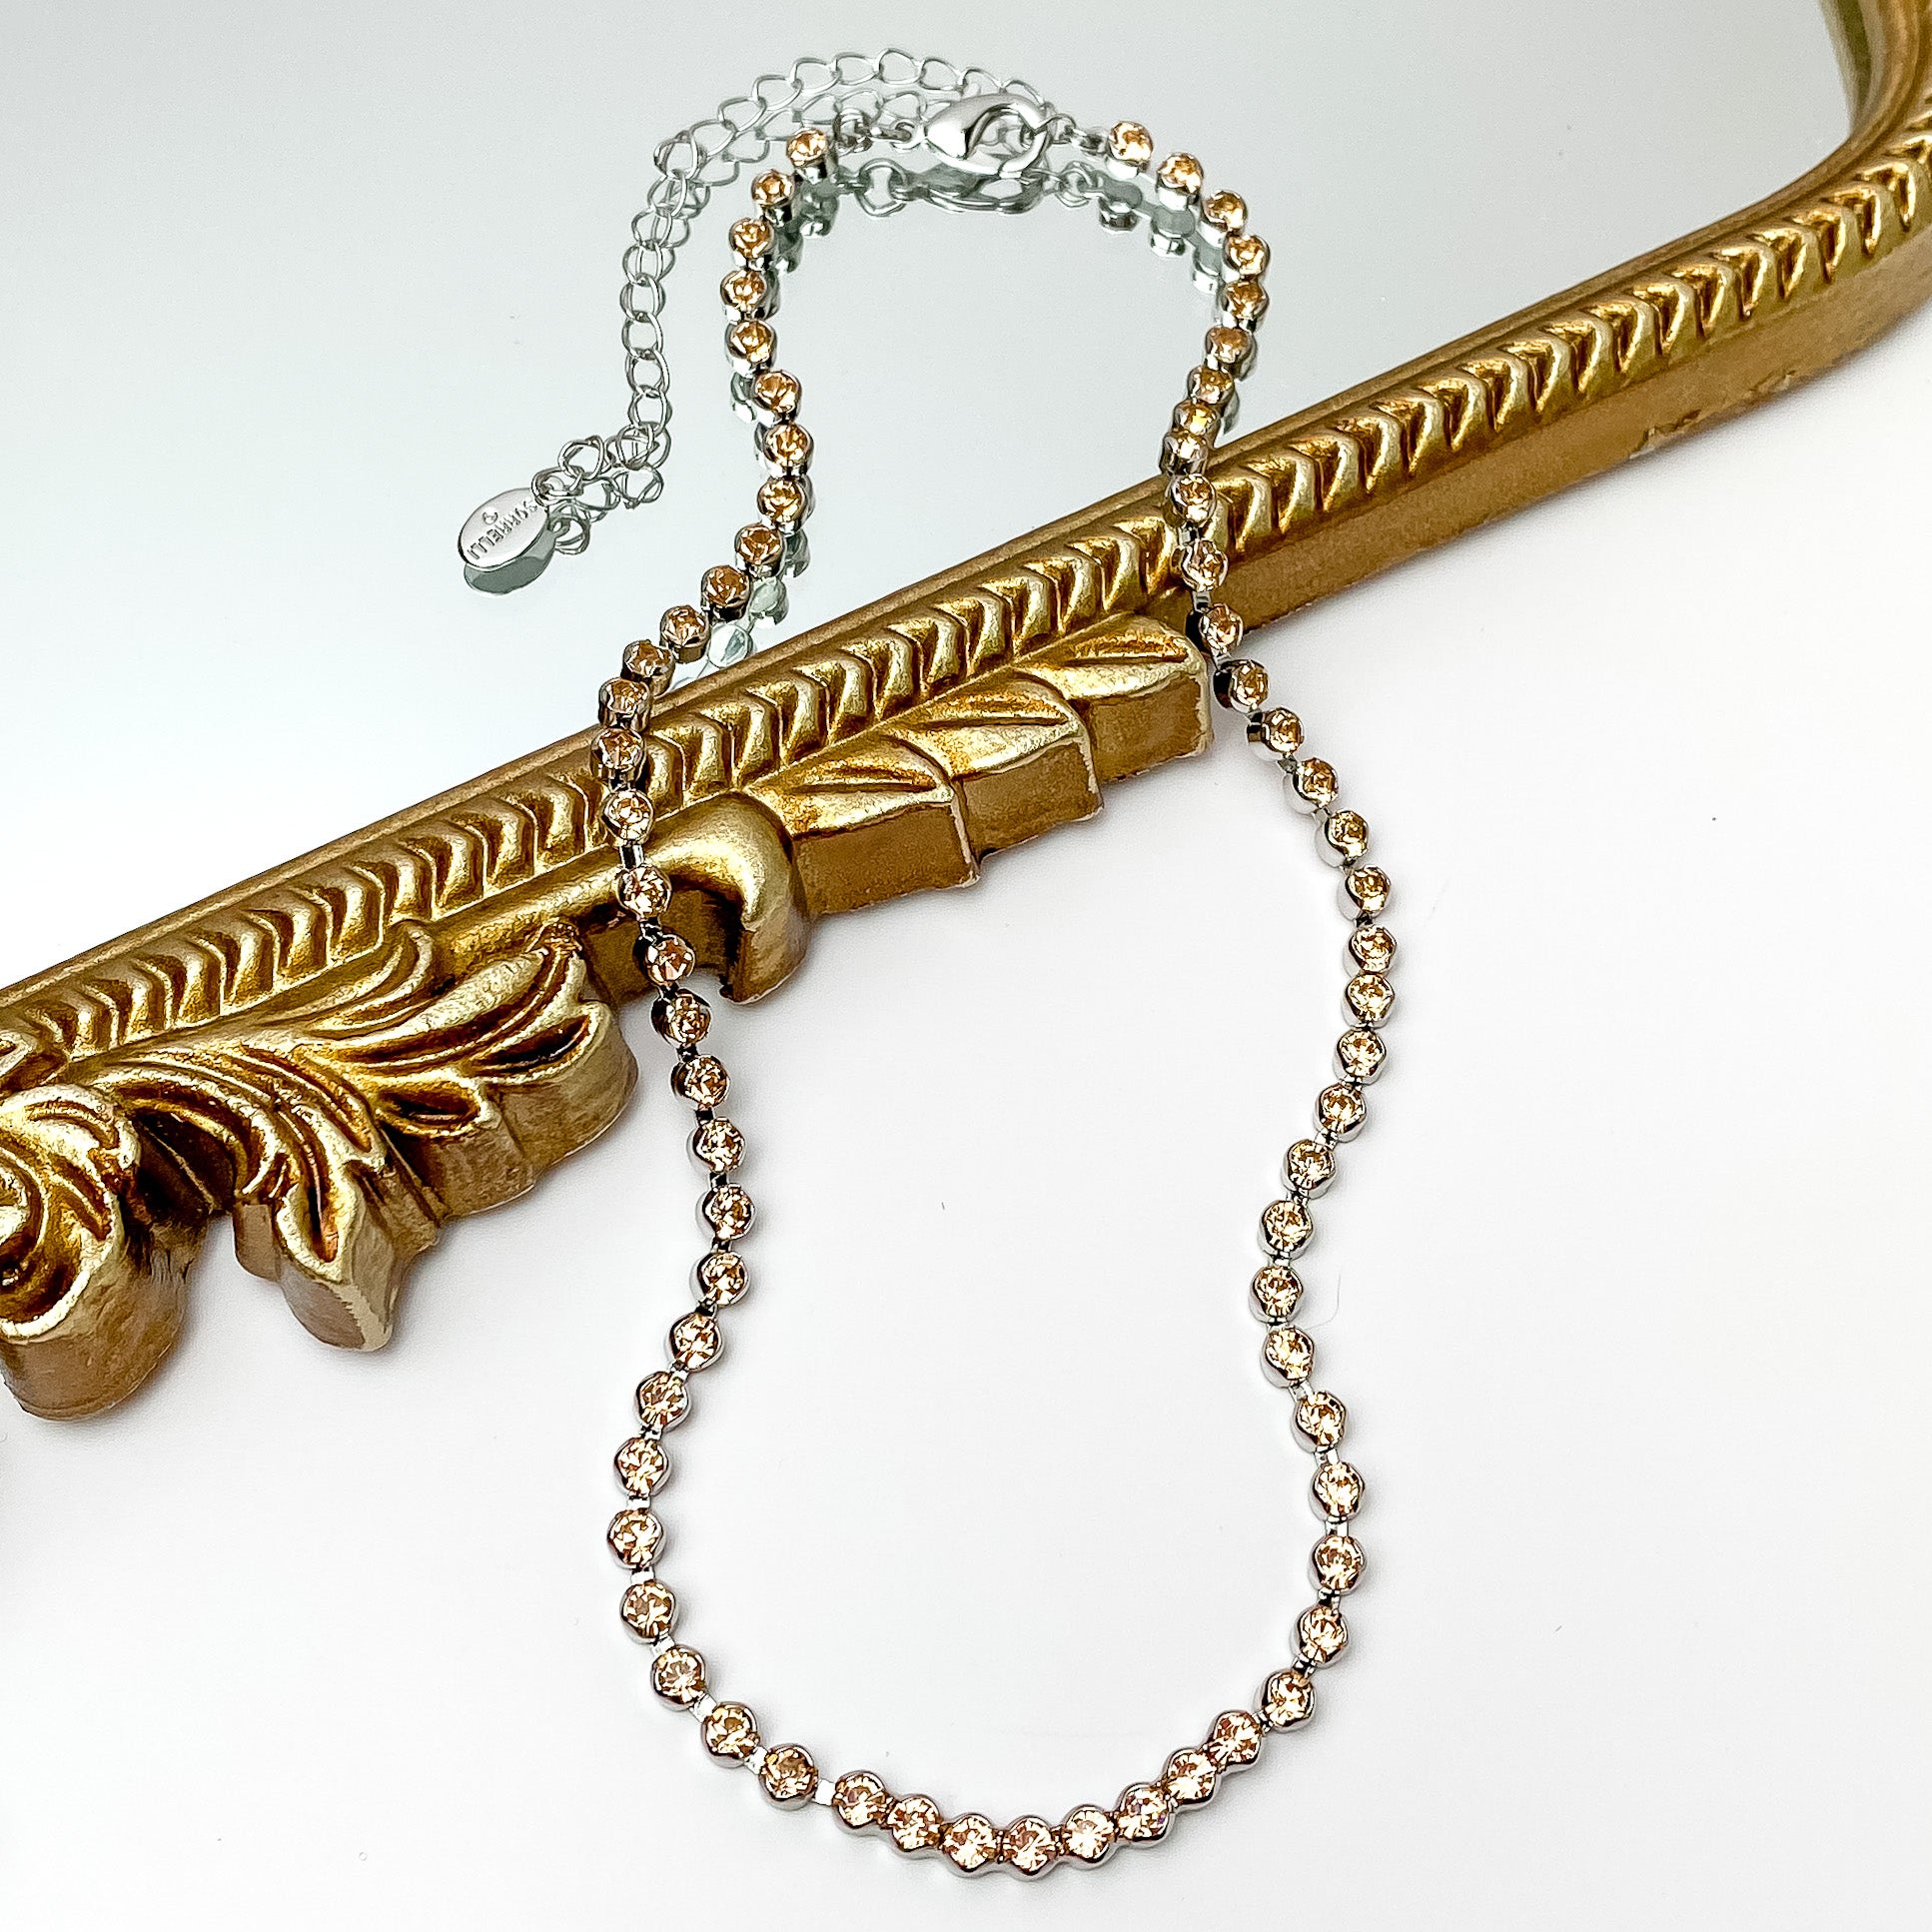 Pictured is a silver necklace with light beige crystals. This necklace is pictured partially on a gold mirror on a white background.